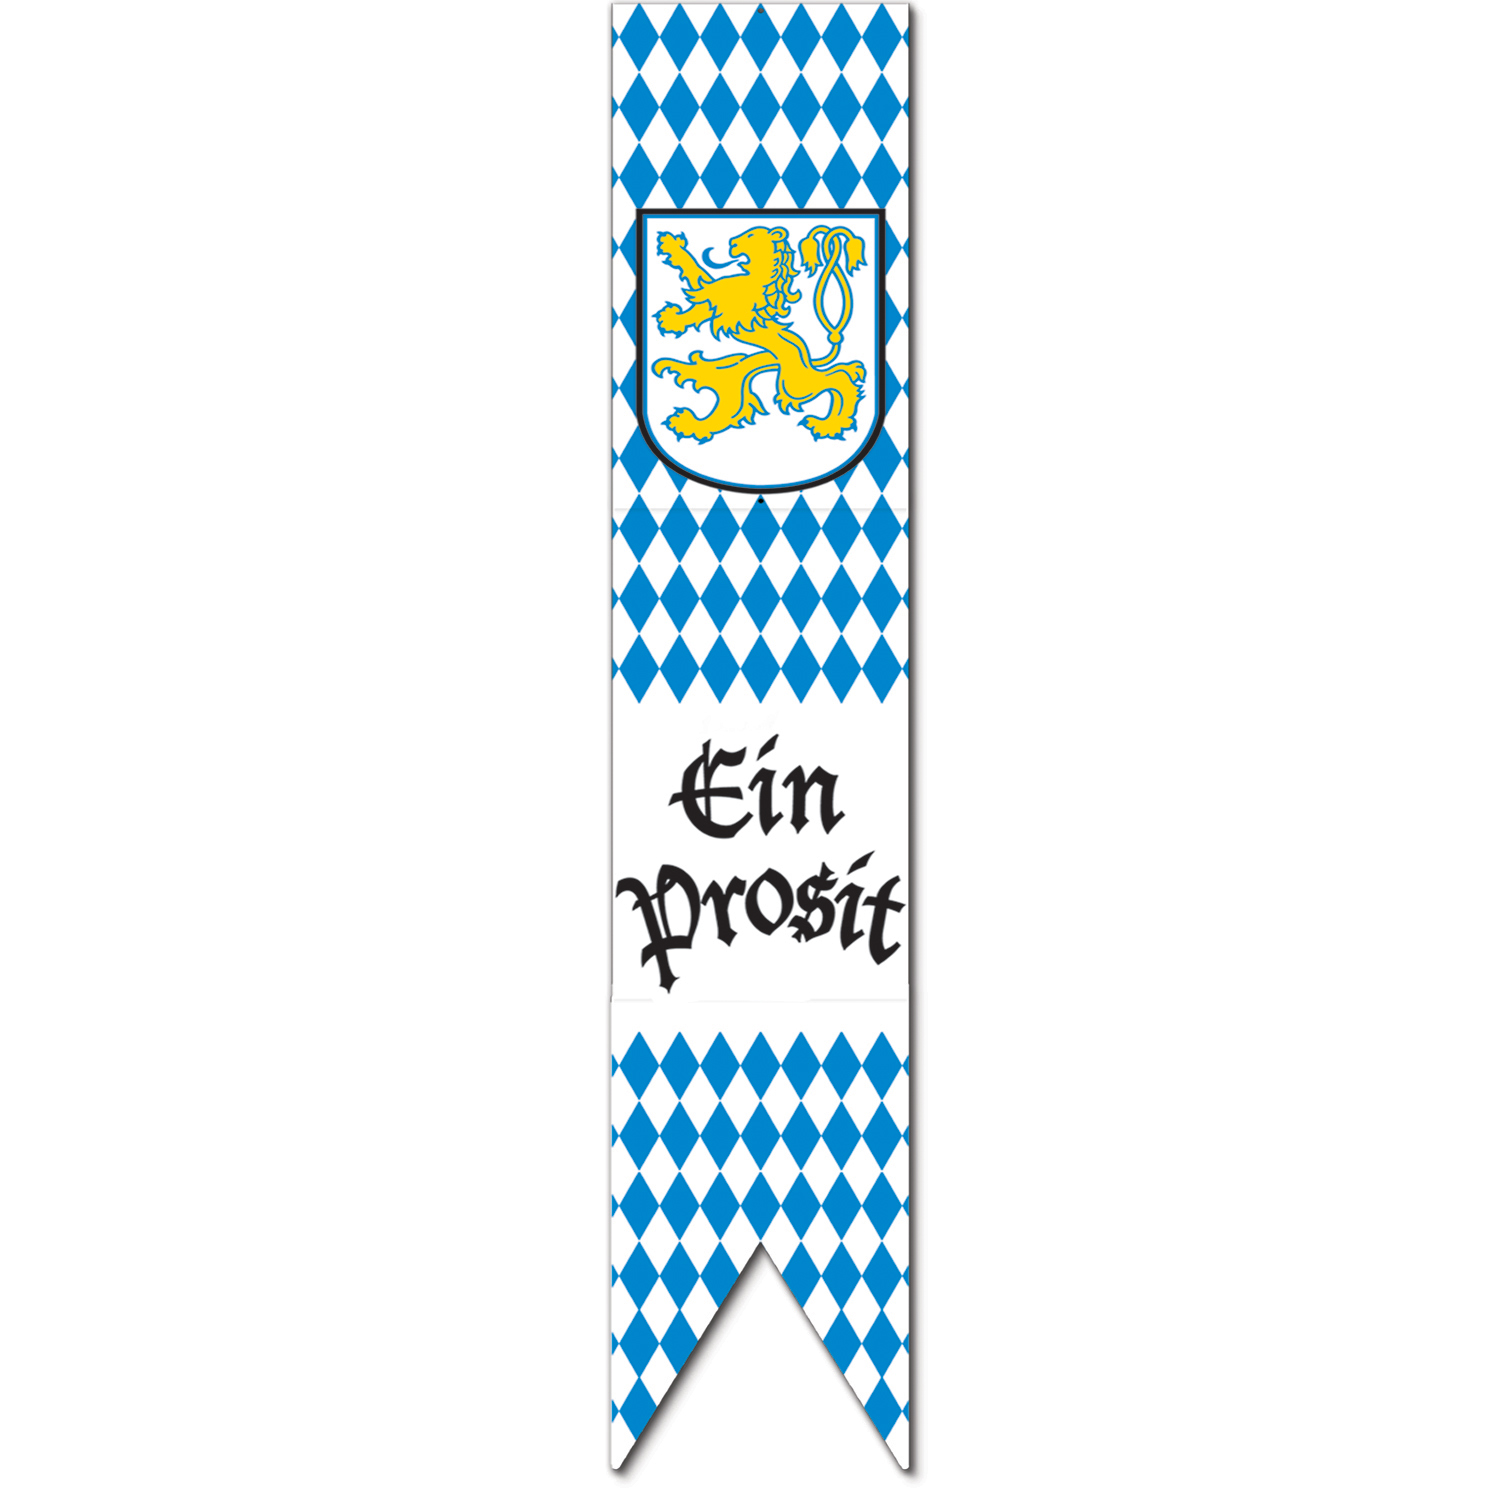 12 pieces of Jointed Oktoberfest PulL-Down Cutout Prtd 2 Sides